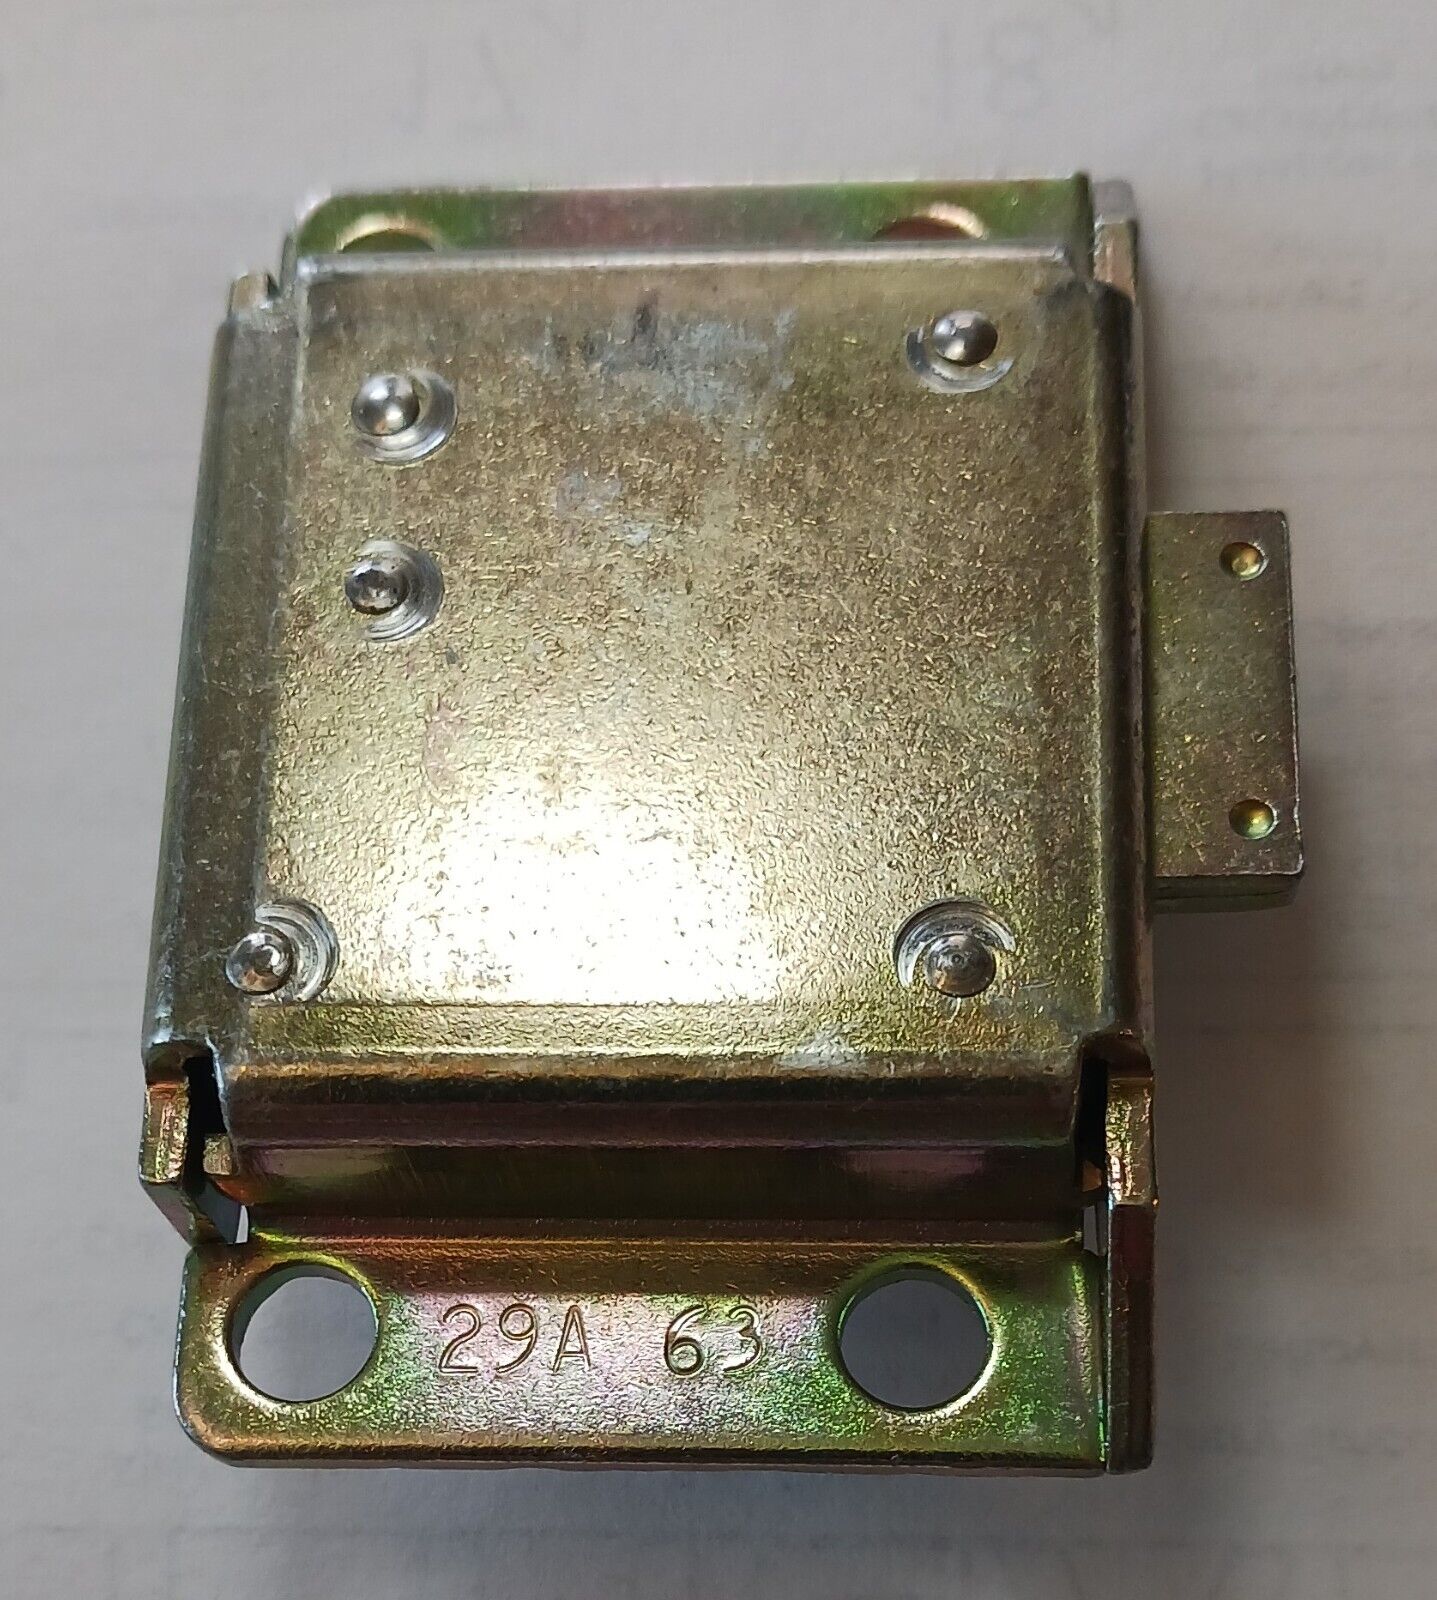 29A 63 - Upper Housing Lock for Western Electric Payphone